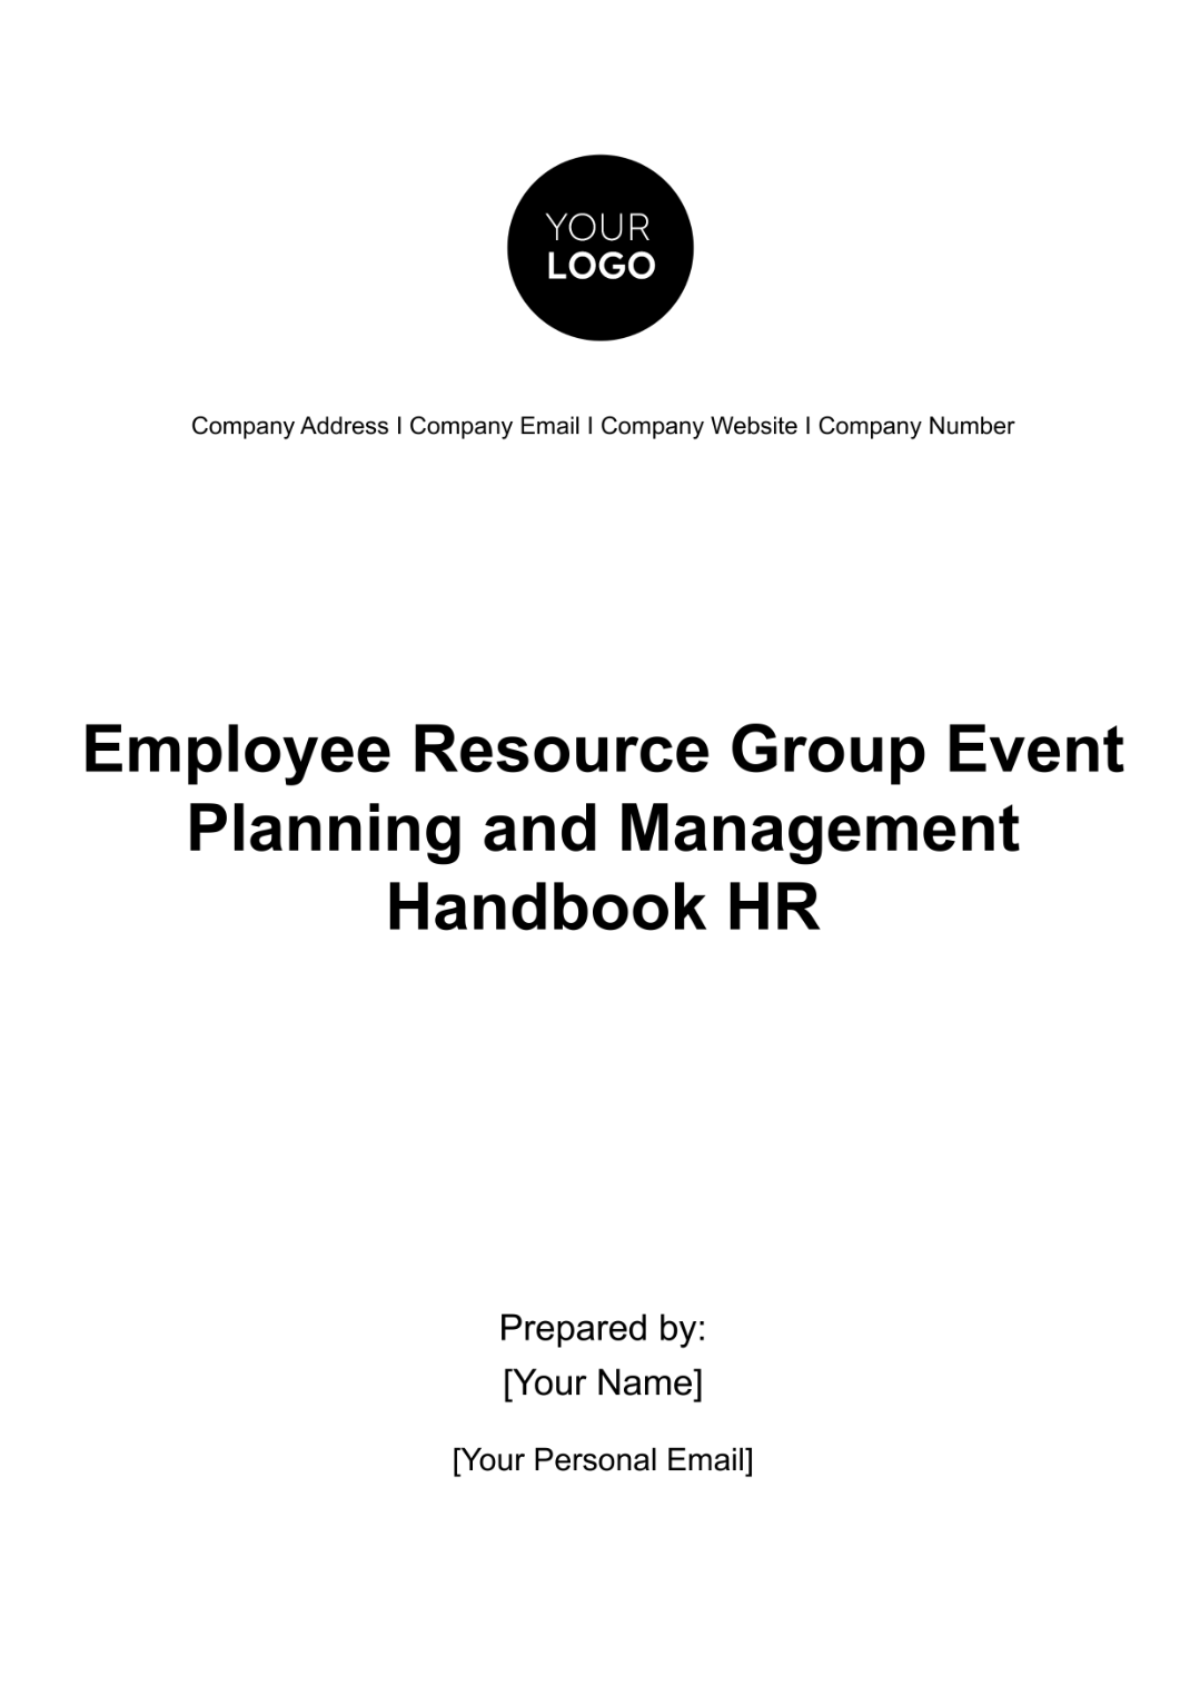 Free Employee Resource Group Event Planning and Management Handbook HR Template